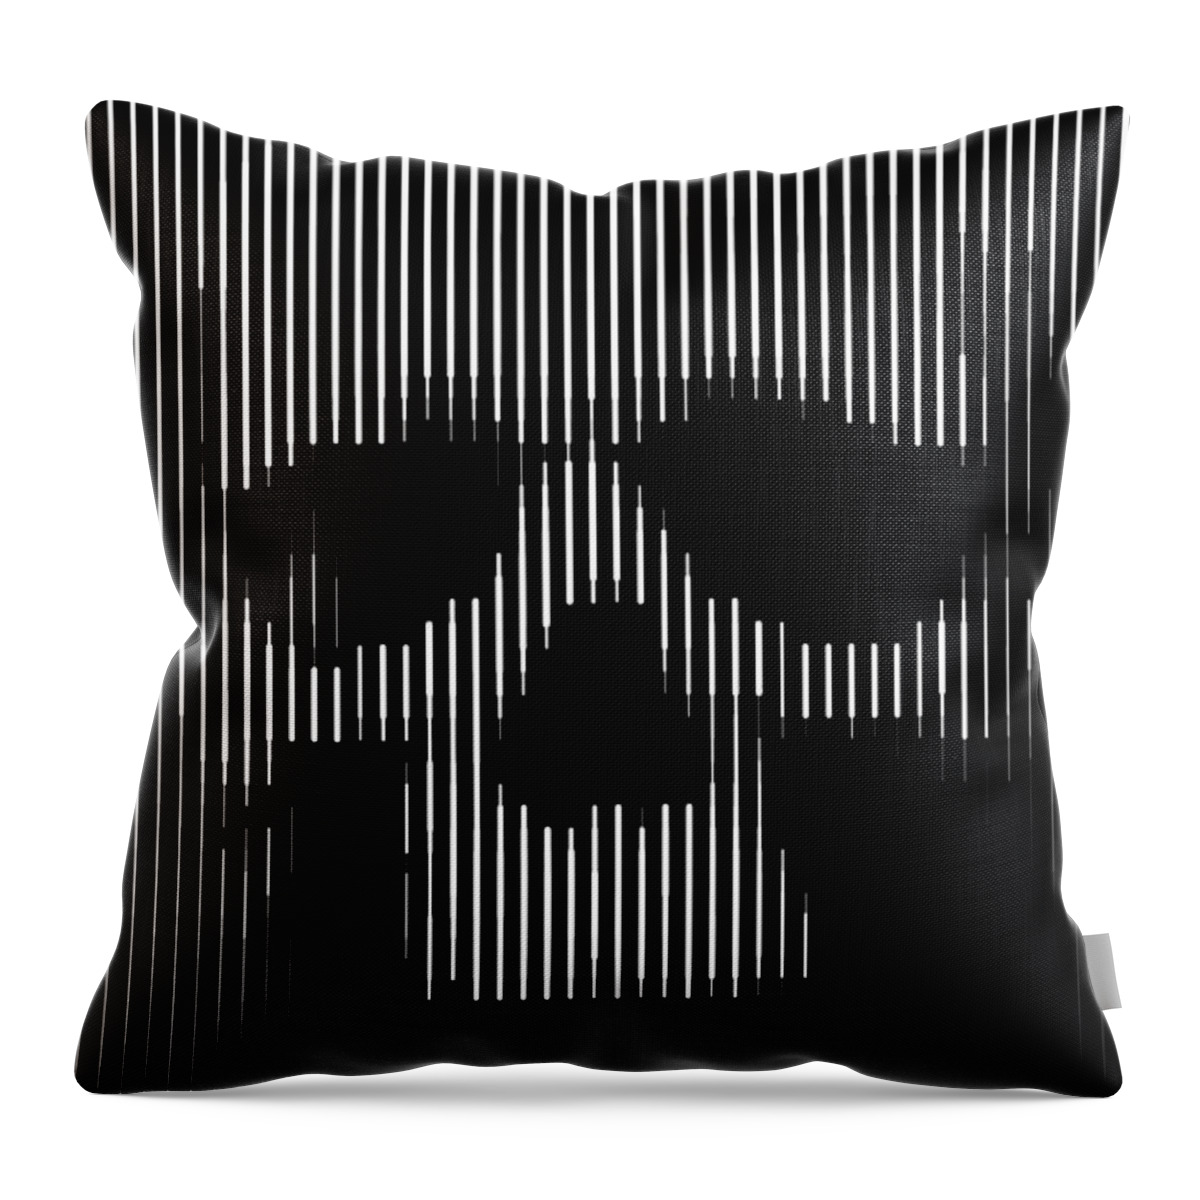 Skull Throw Pillow featuring the painting Skull Lines by Sassan Filsoof